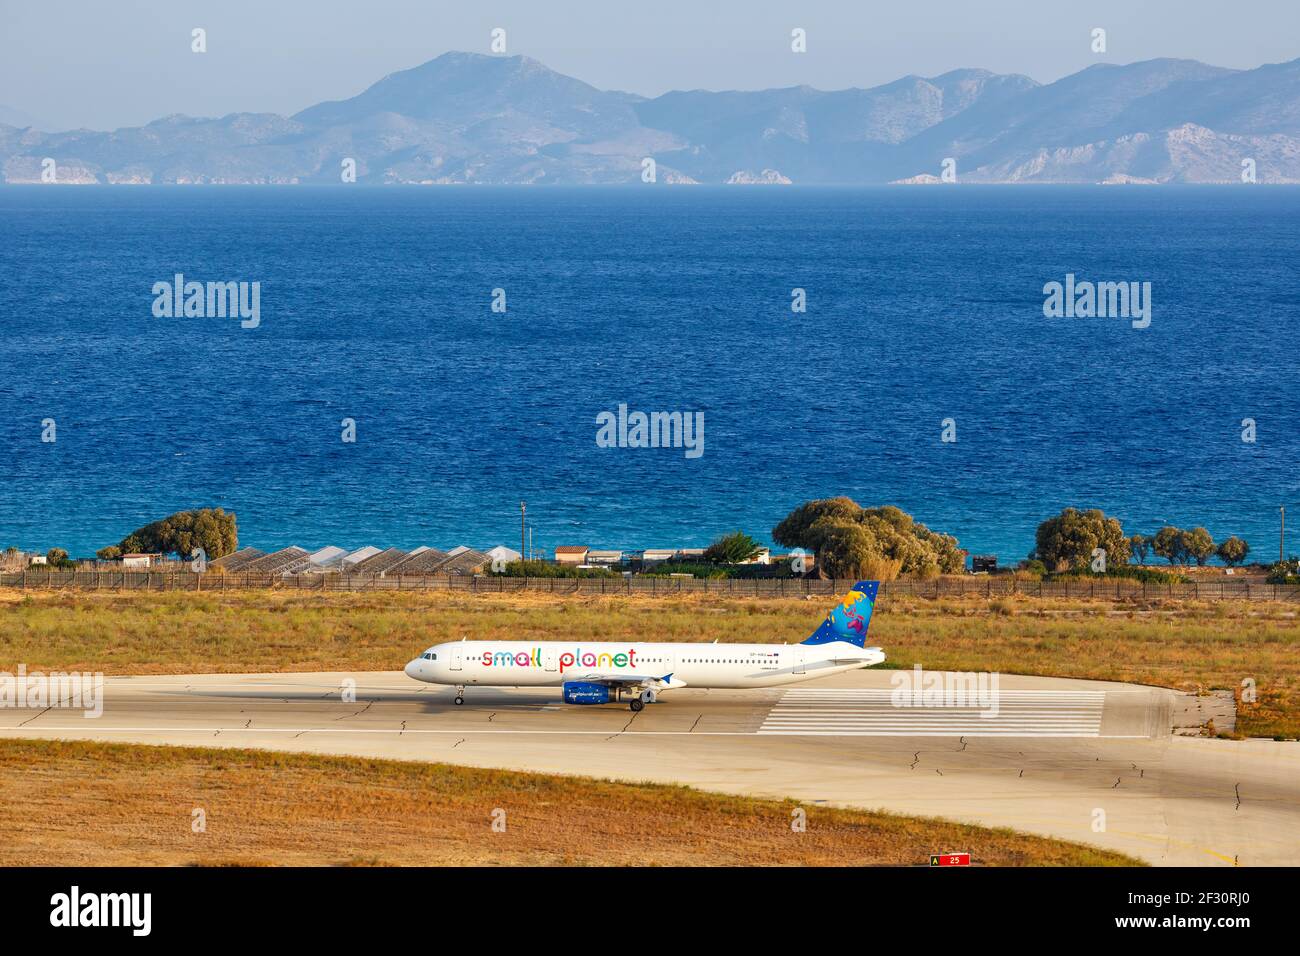 Rhodes, Greece - September 14, 2018: A Small Planet Airlines Polska Airbus A321 airplane at Rhodes airport (RHO) in Greece. Stock Photo